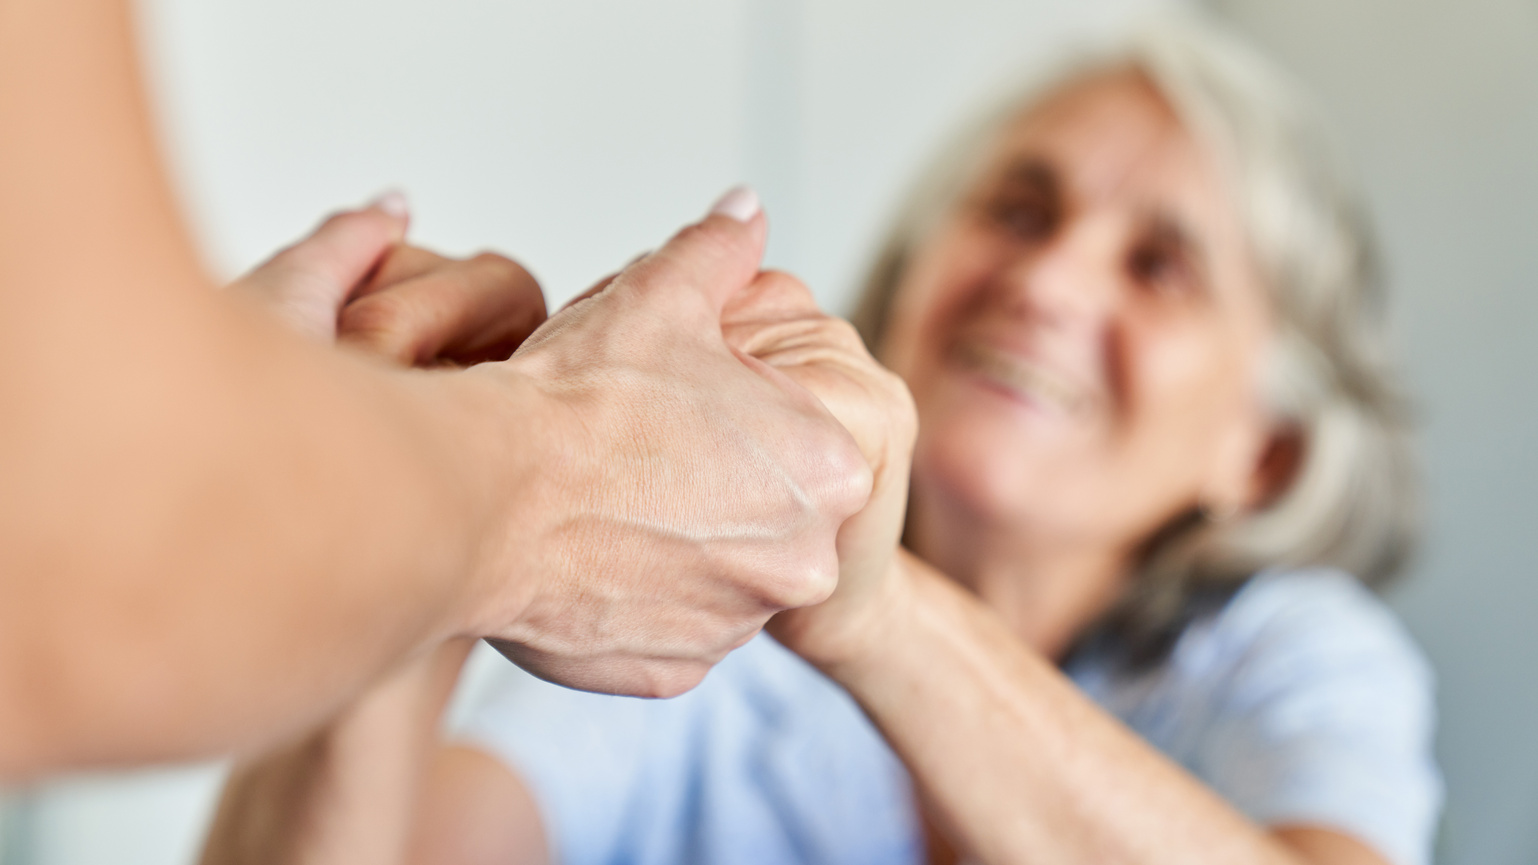 Hands of a Senior Citizen Hold for Support and Comfort